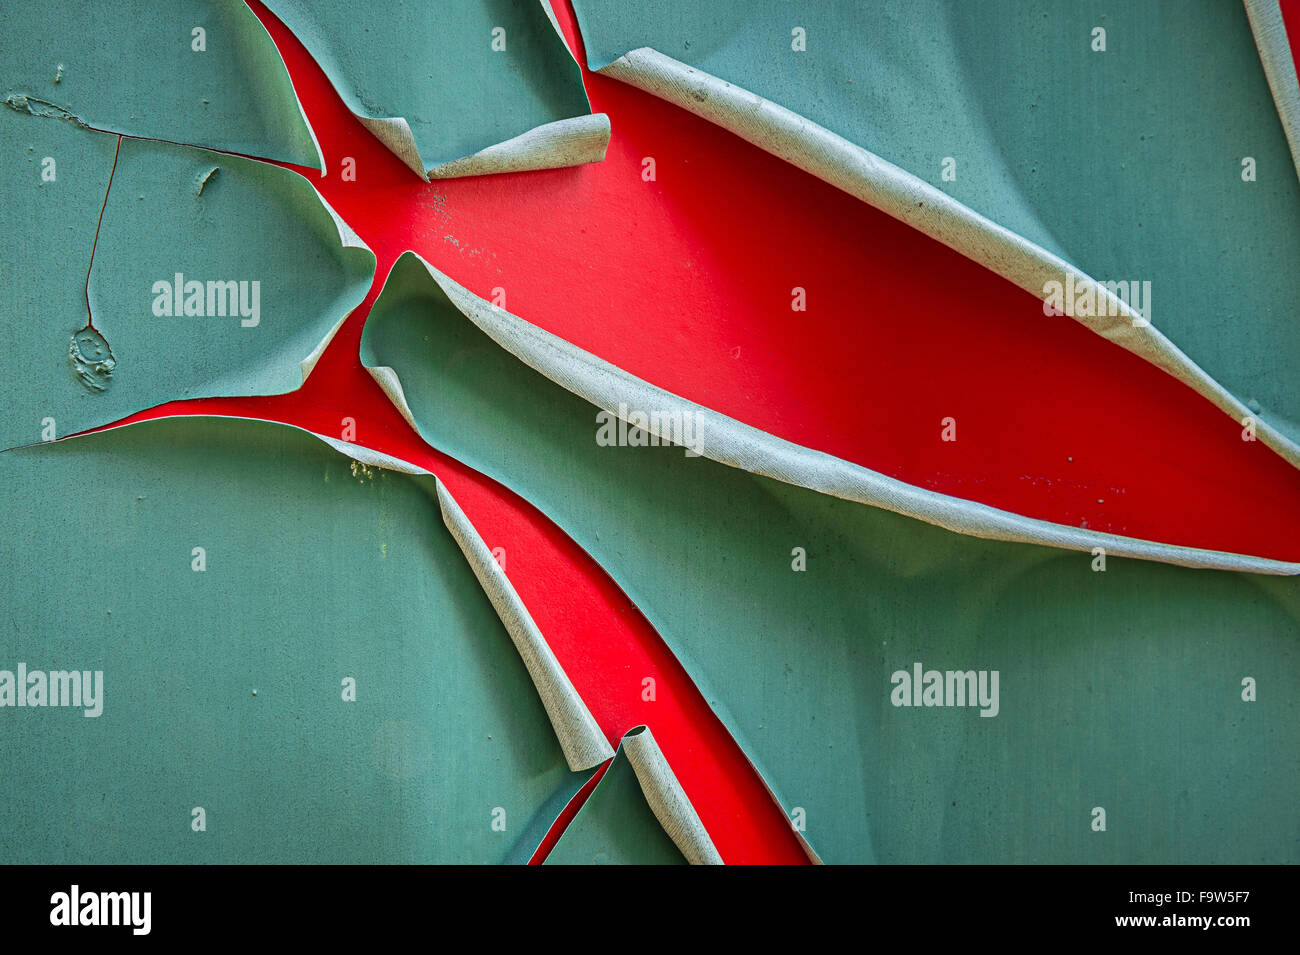 Colorful Red And Green Peeling Paint Stock Photo